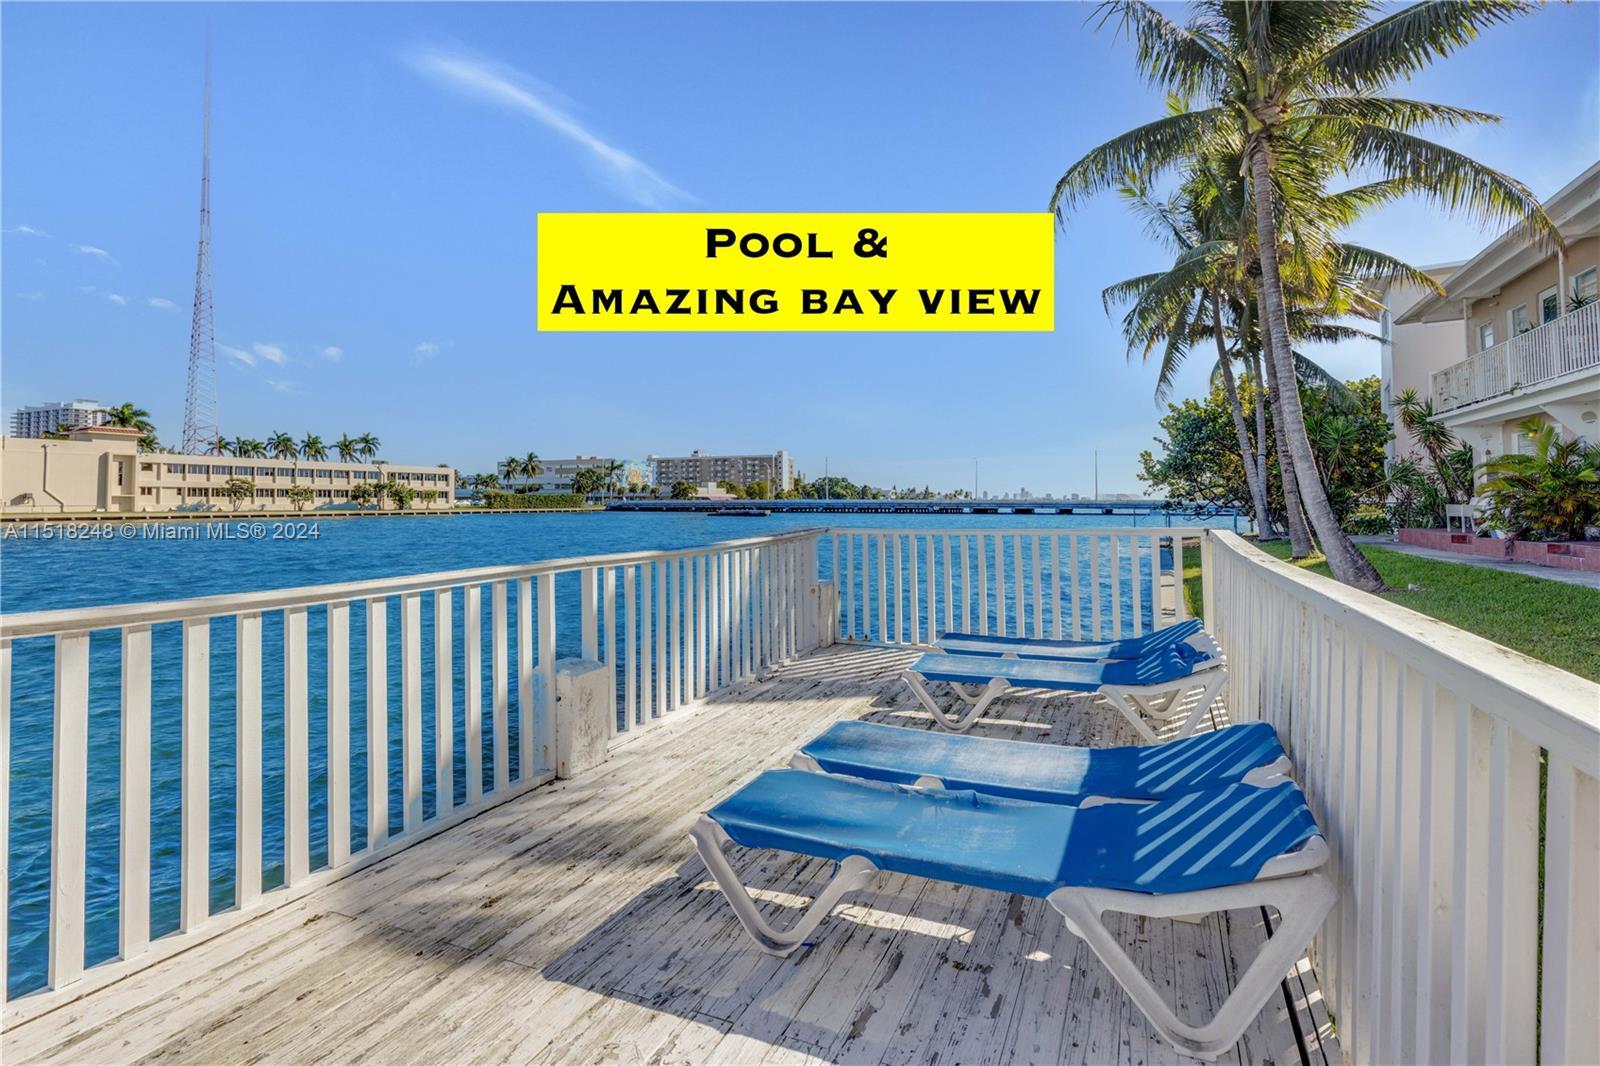 Waterfront Paradise with Pool - 1 Bed, 1 Bath Condo at 7920 East Dr, North Bay Village

Charming 1